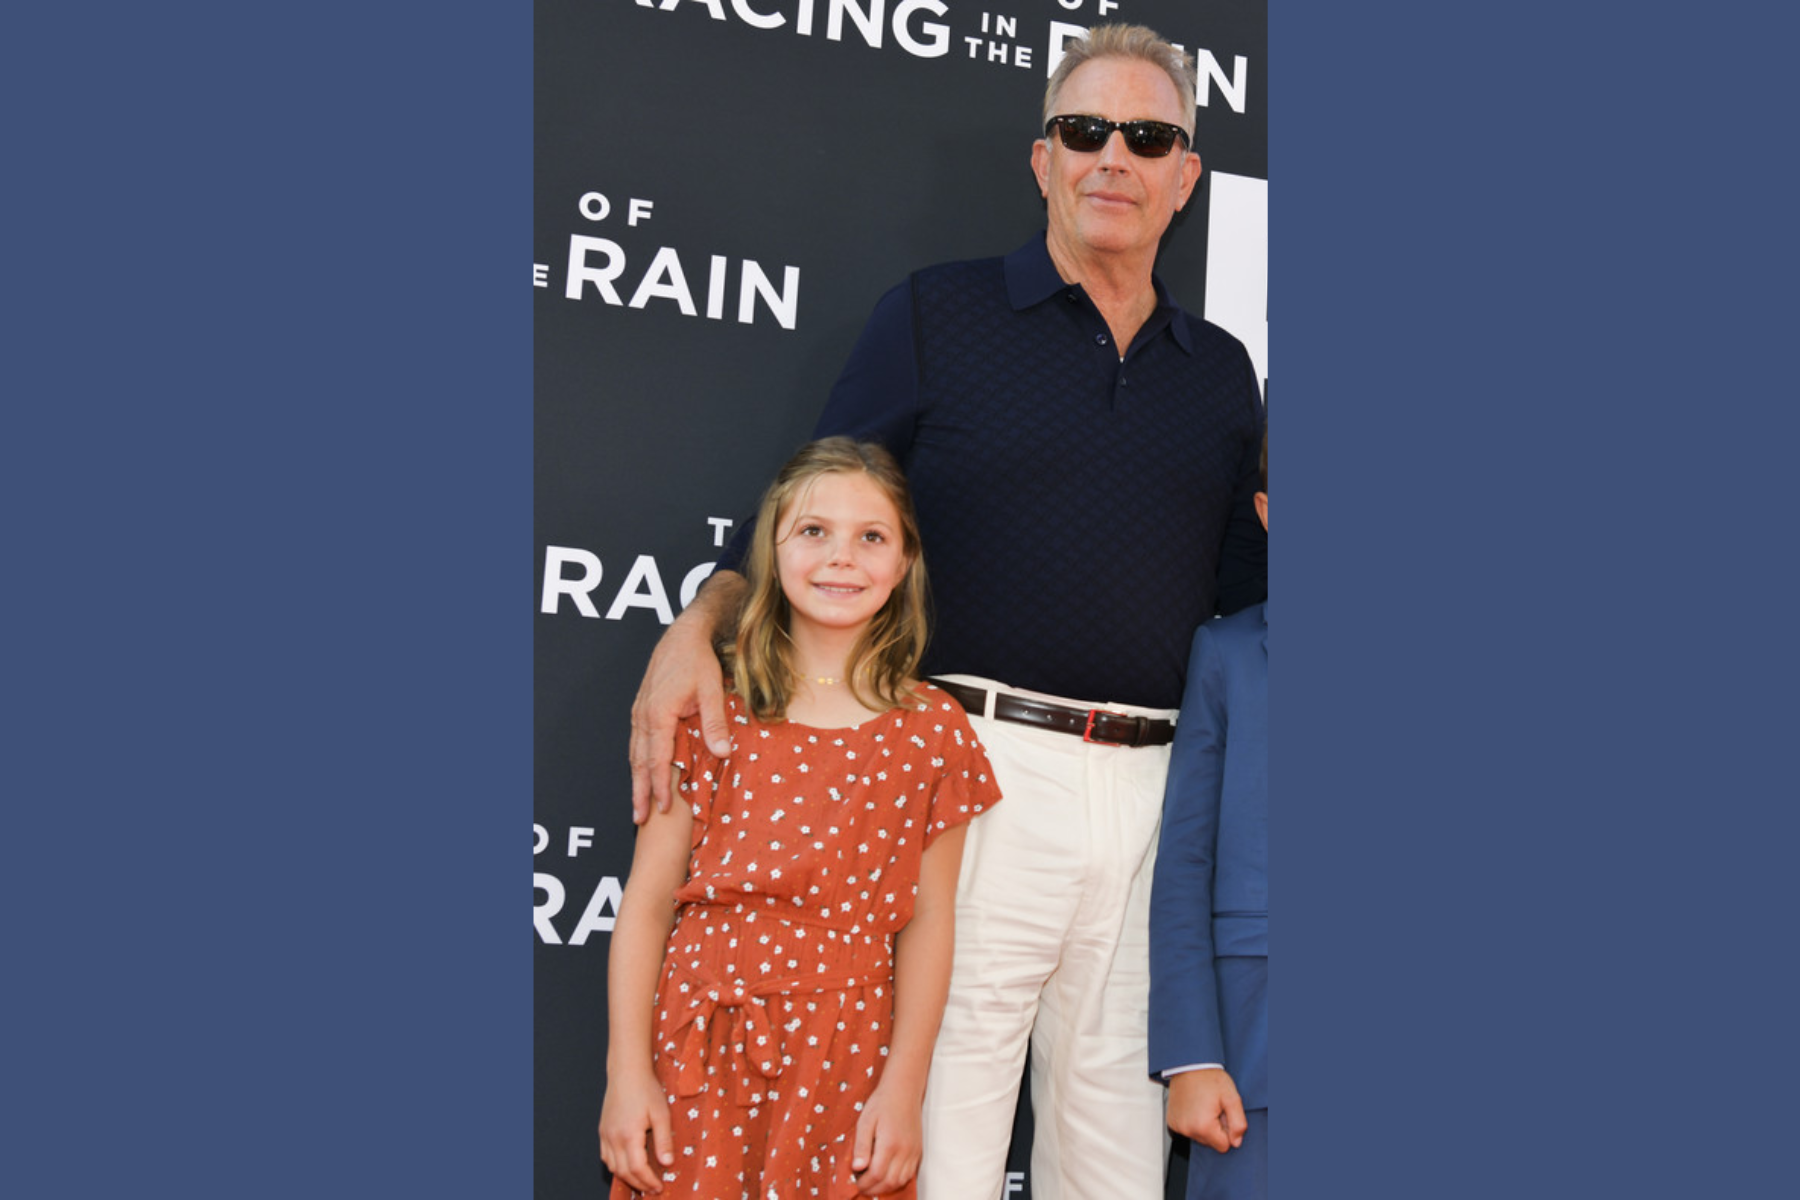 Grace Costner poses for a photo with his father by her side at an event